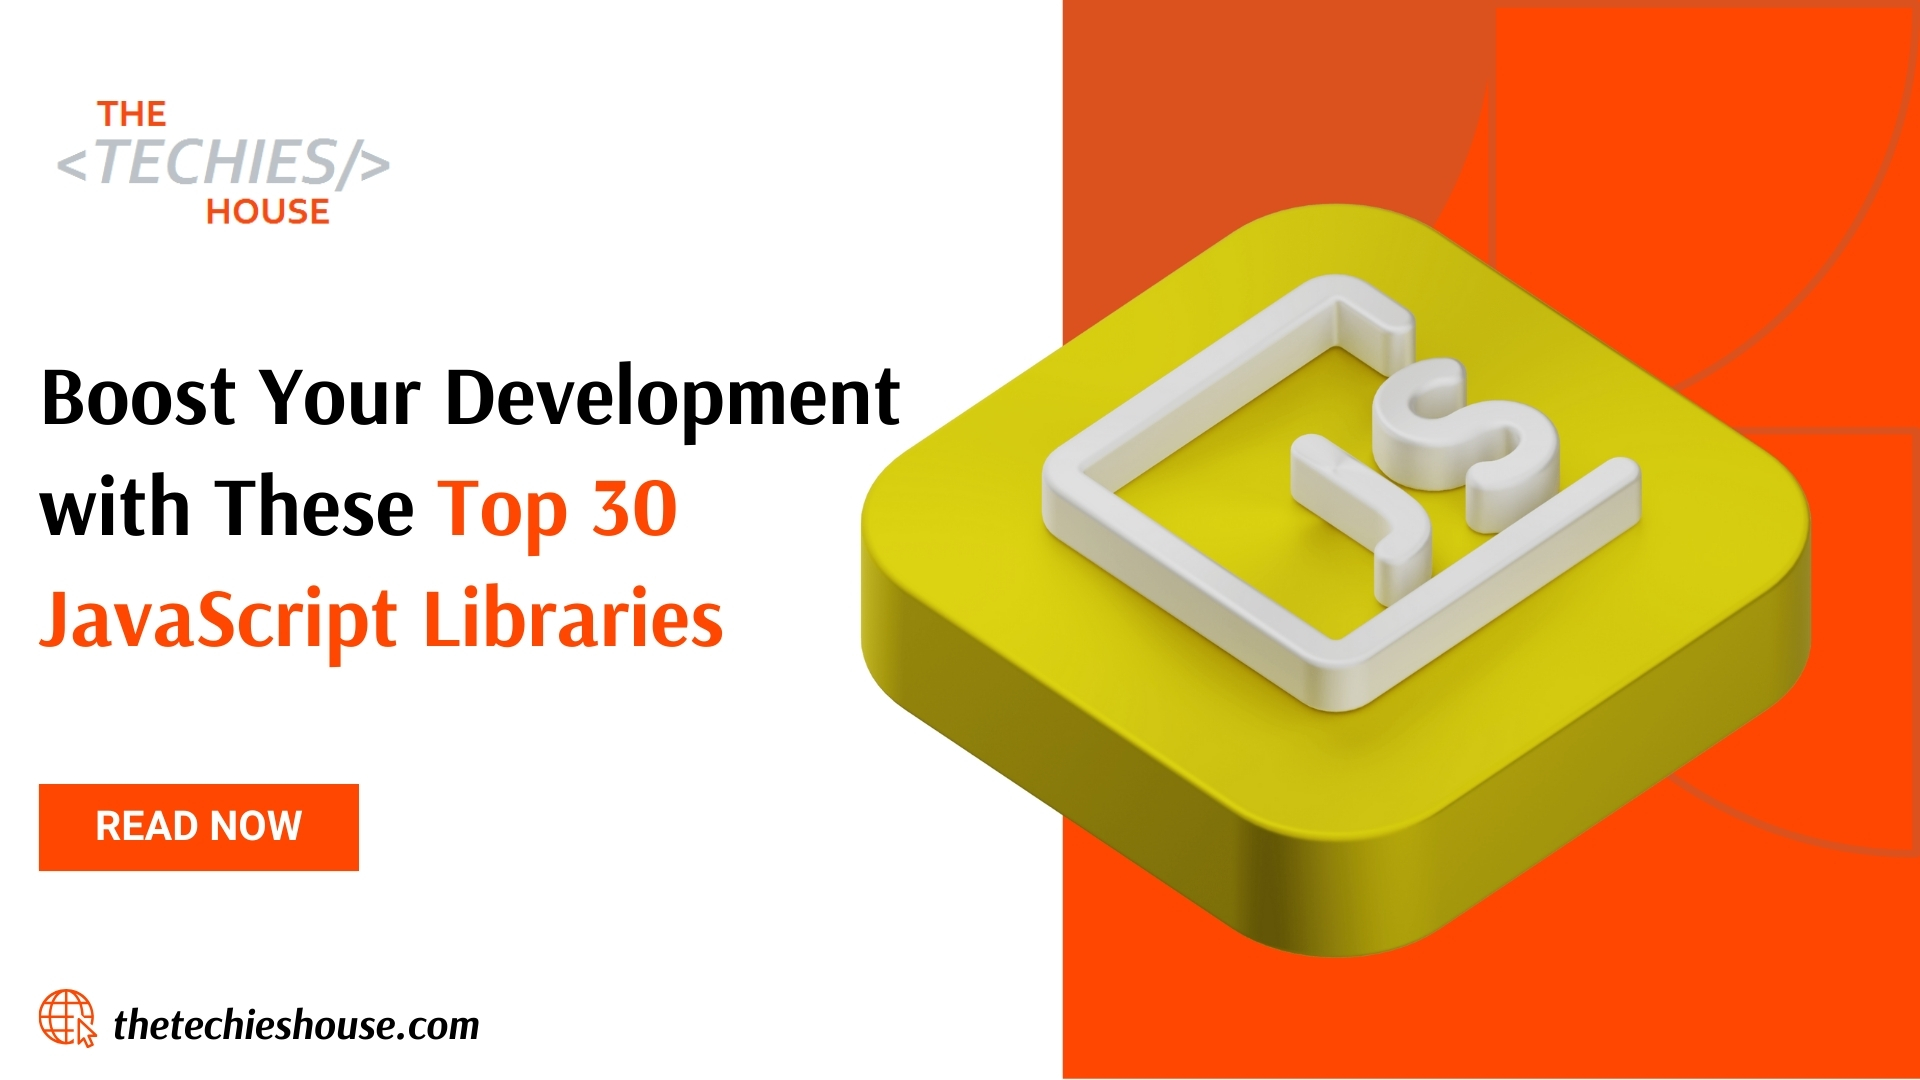 Boost Your Development with These Top 30 JavaScript Libraries